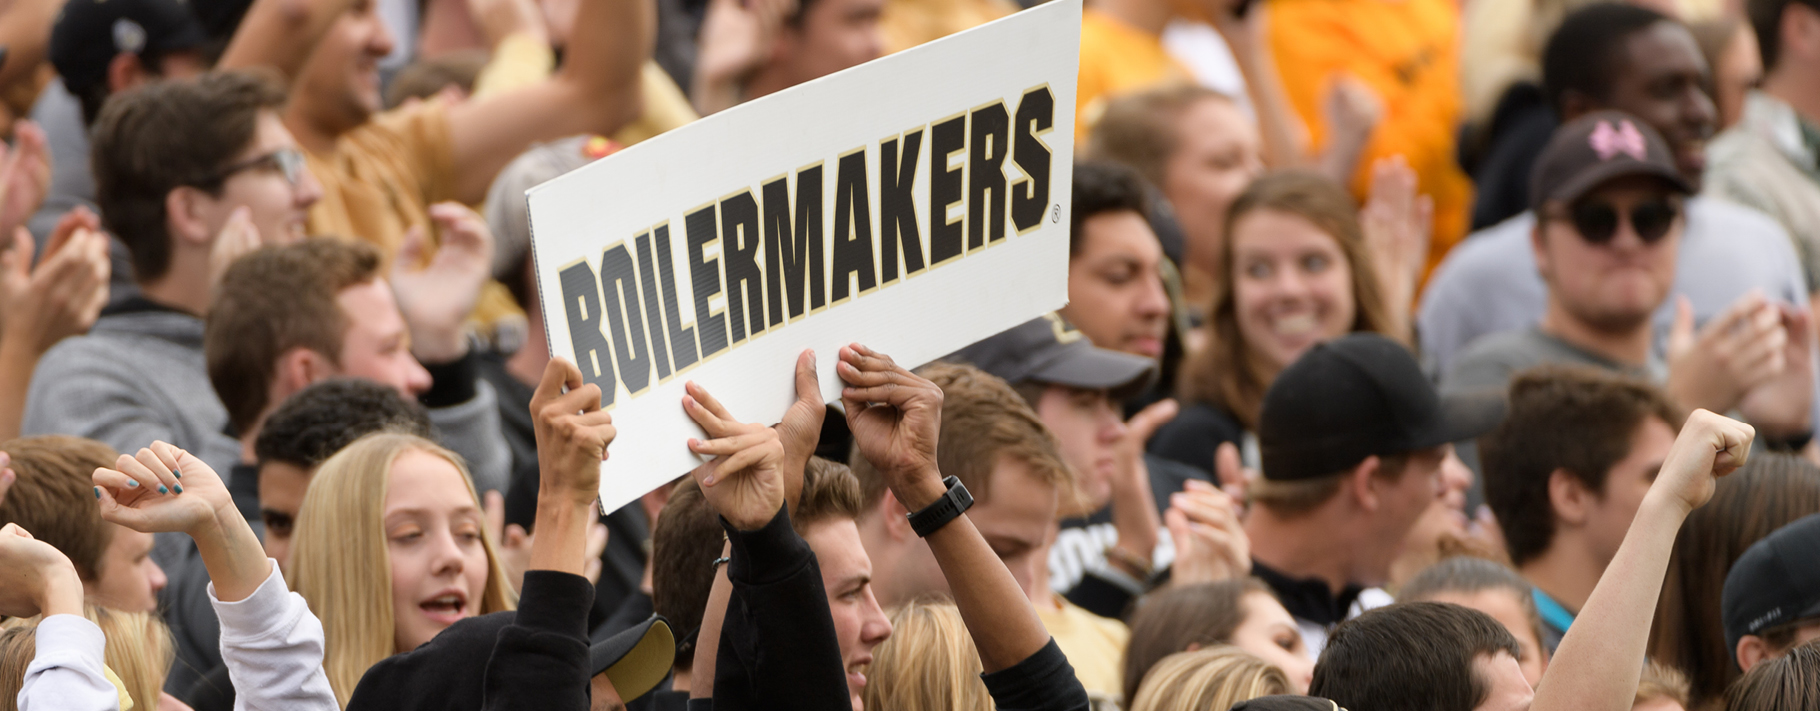 Boilermakers sign hold by Purdue University students